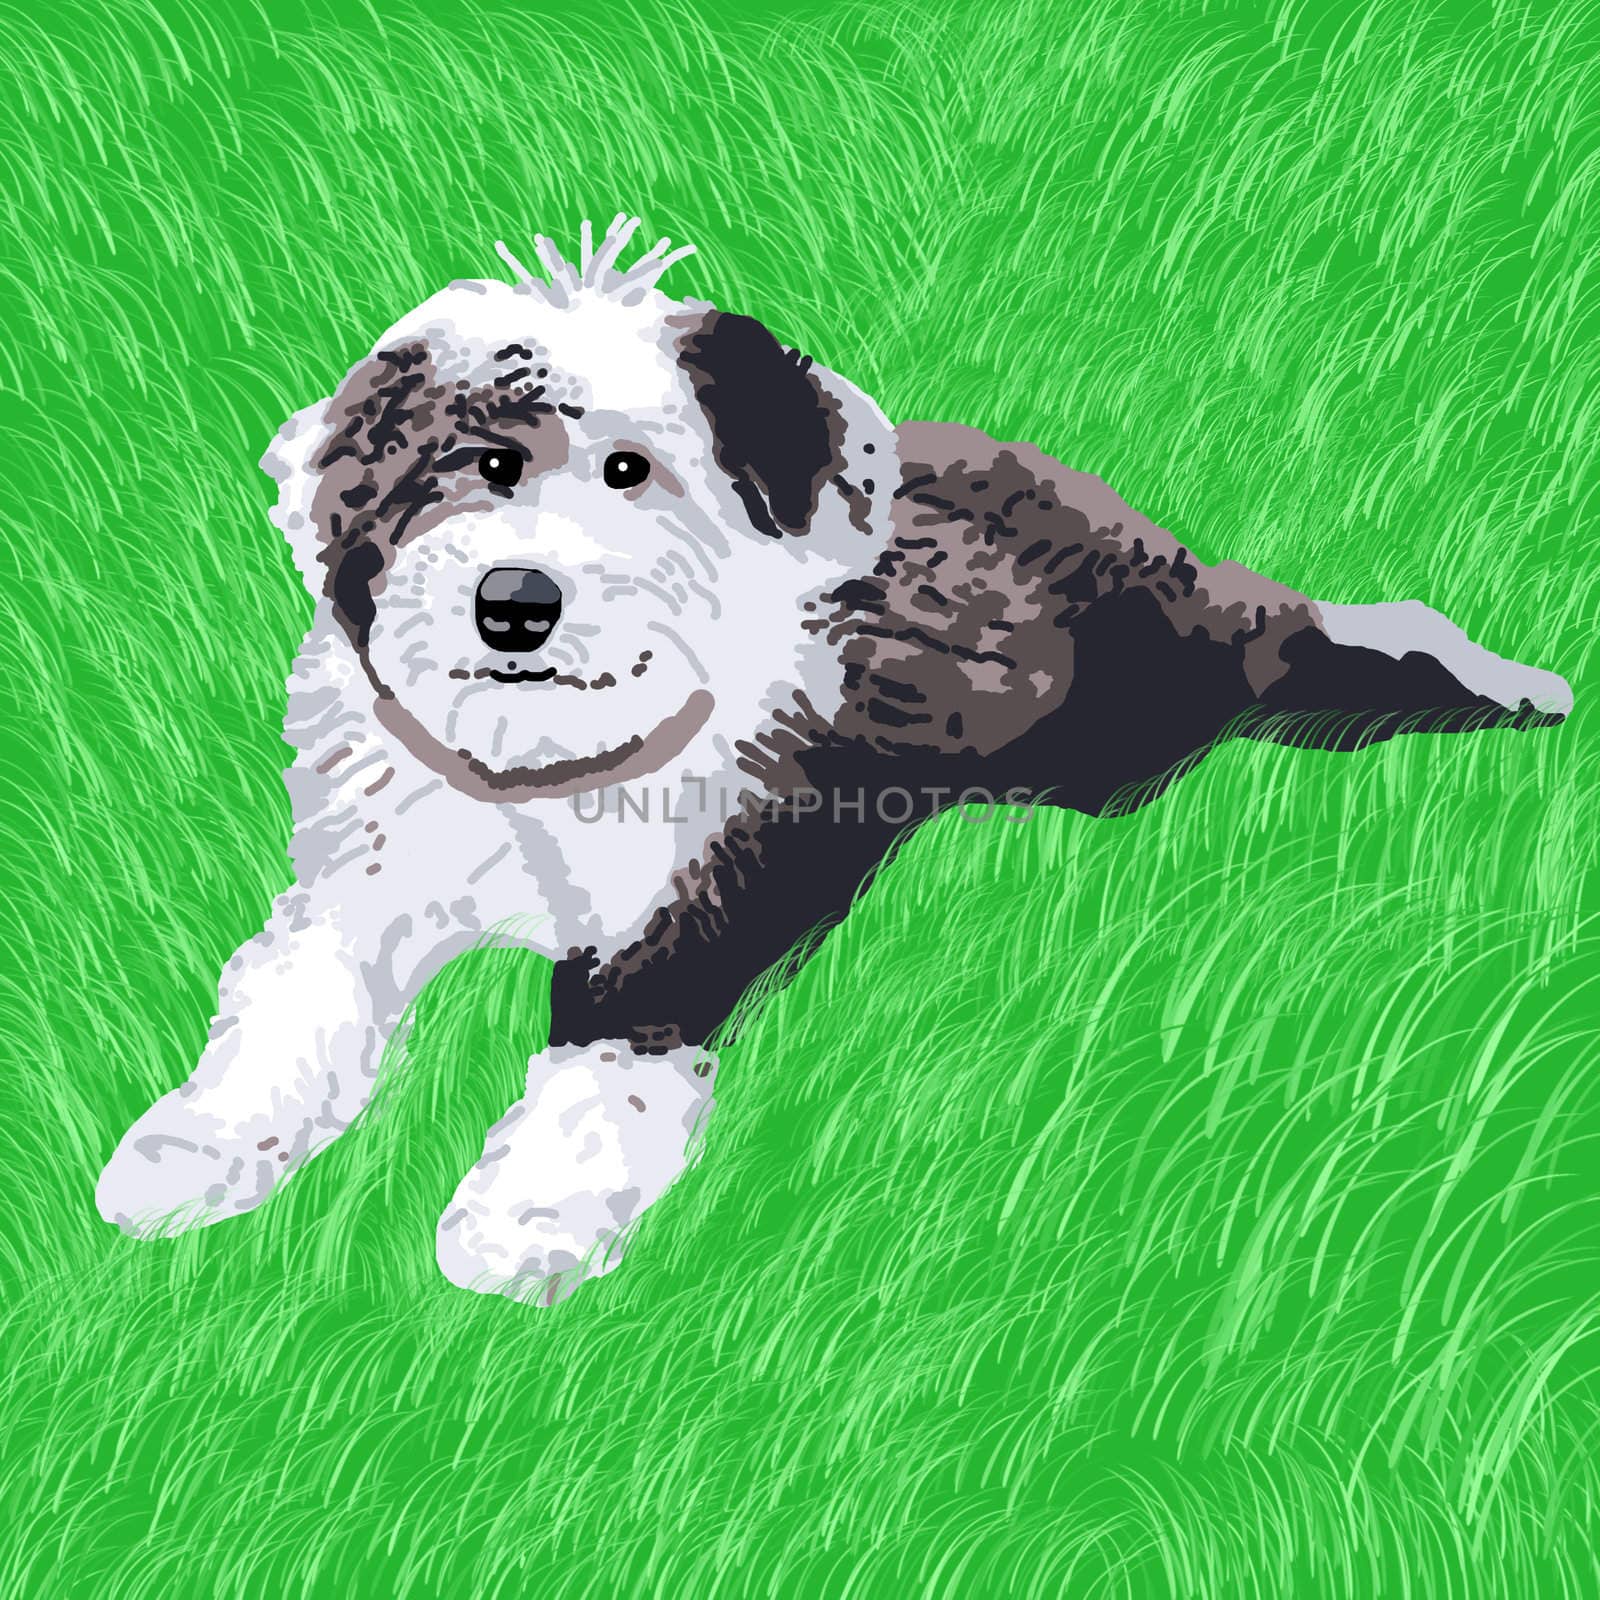 A happy sheepdog puppy happily lying in the grass.